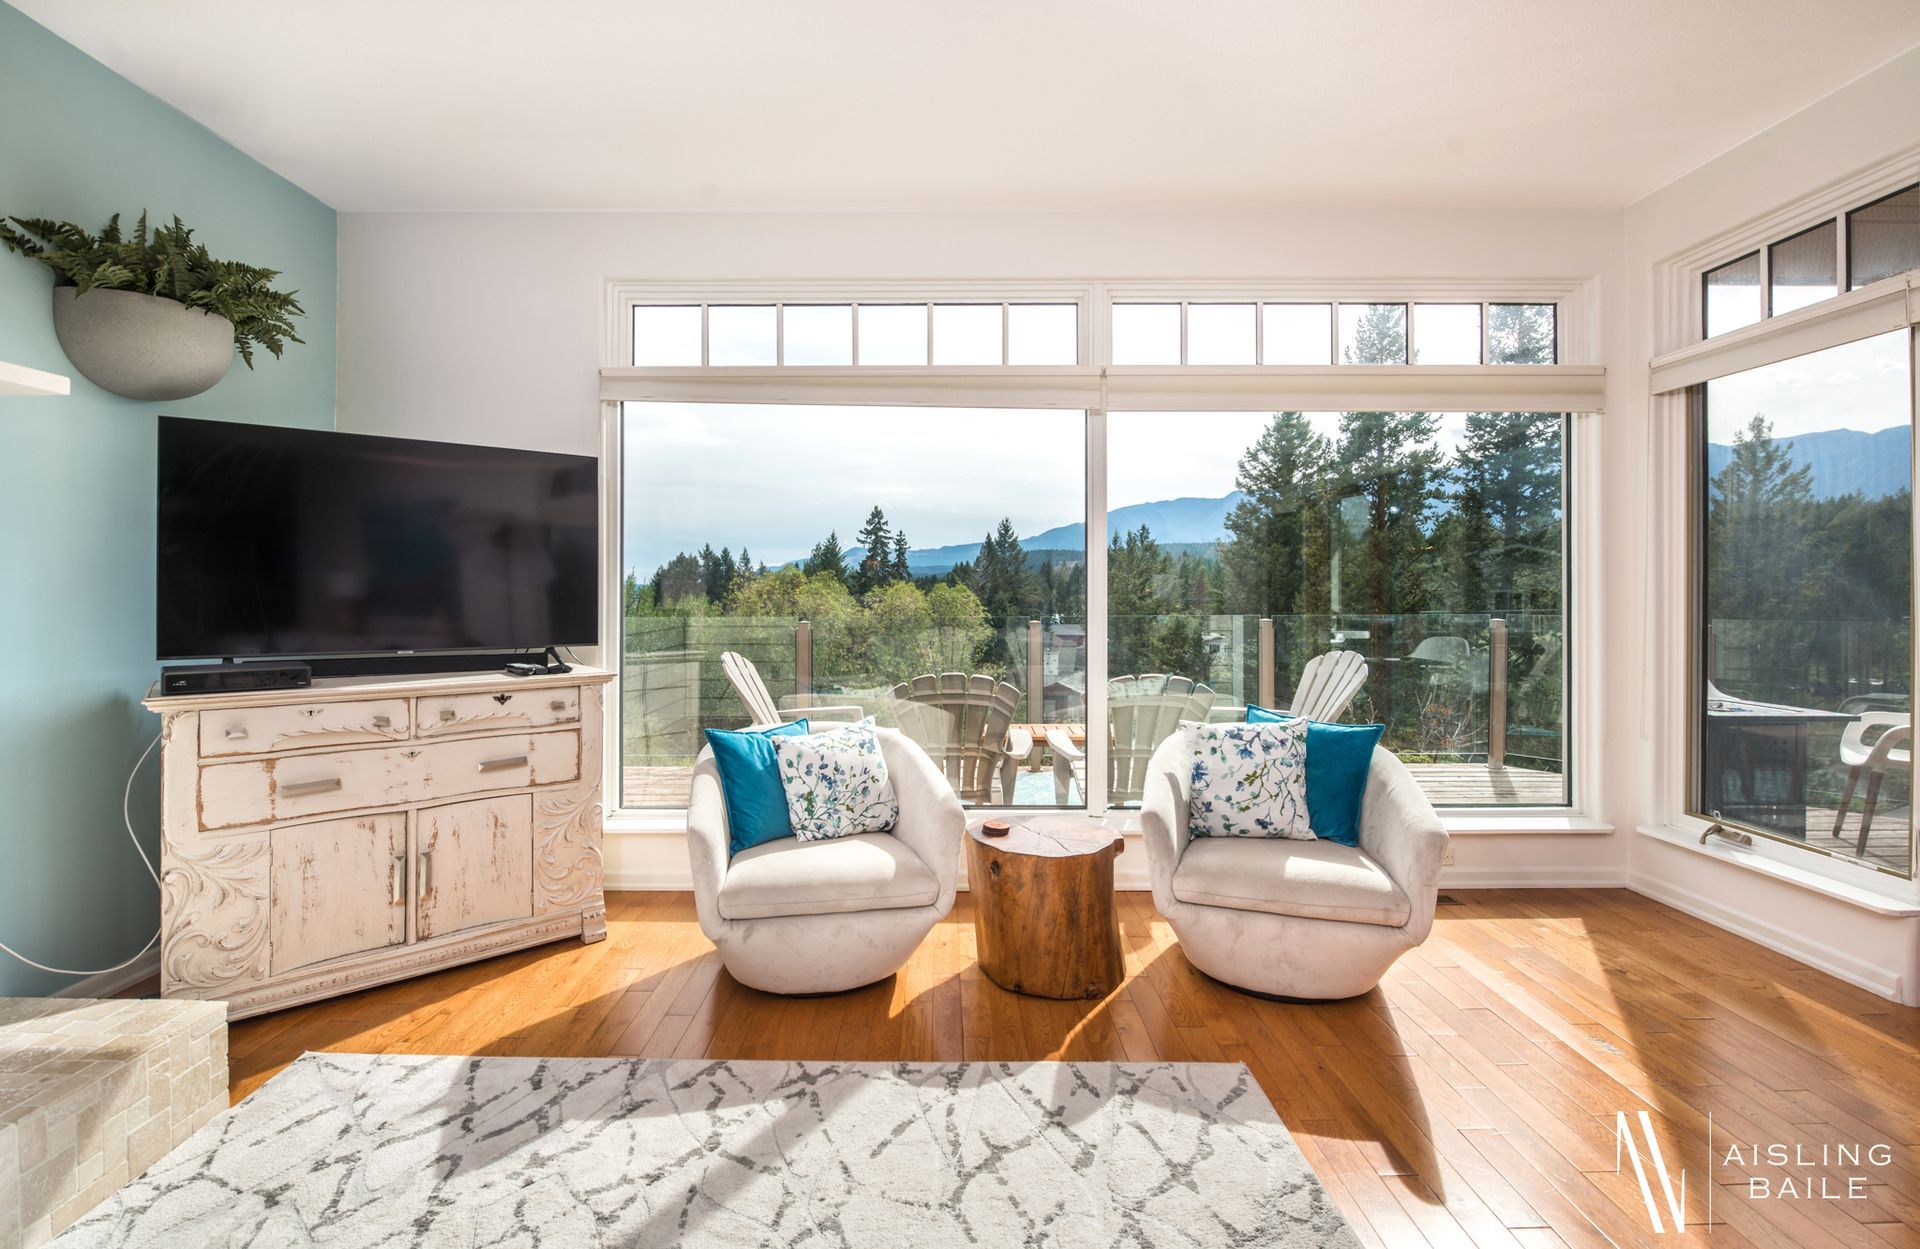 Main floor living room with mountain views of the Central Elegance, an Invermere BC Vacation Rental hosted by Aisling Baile Property Management.